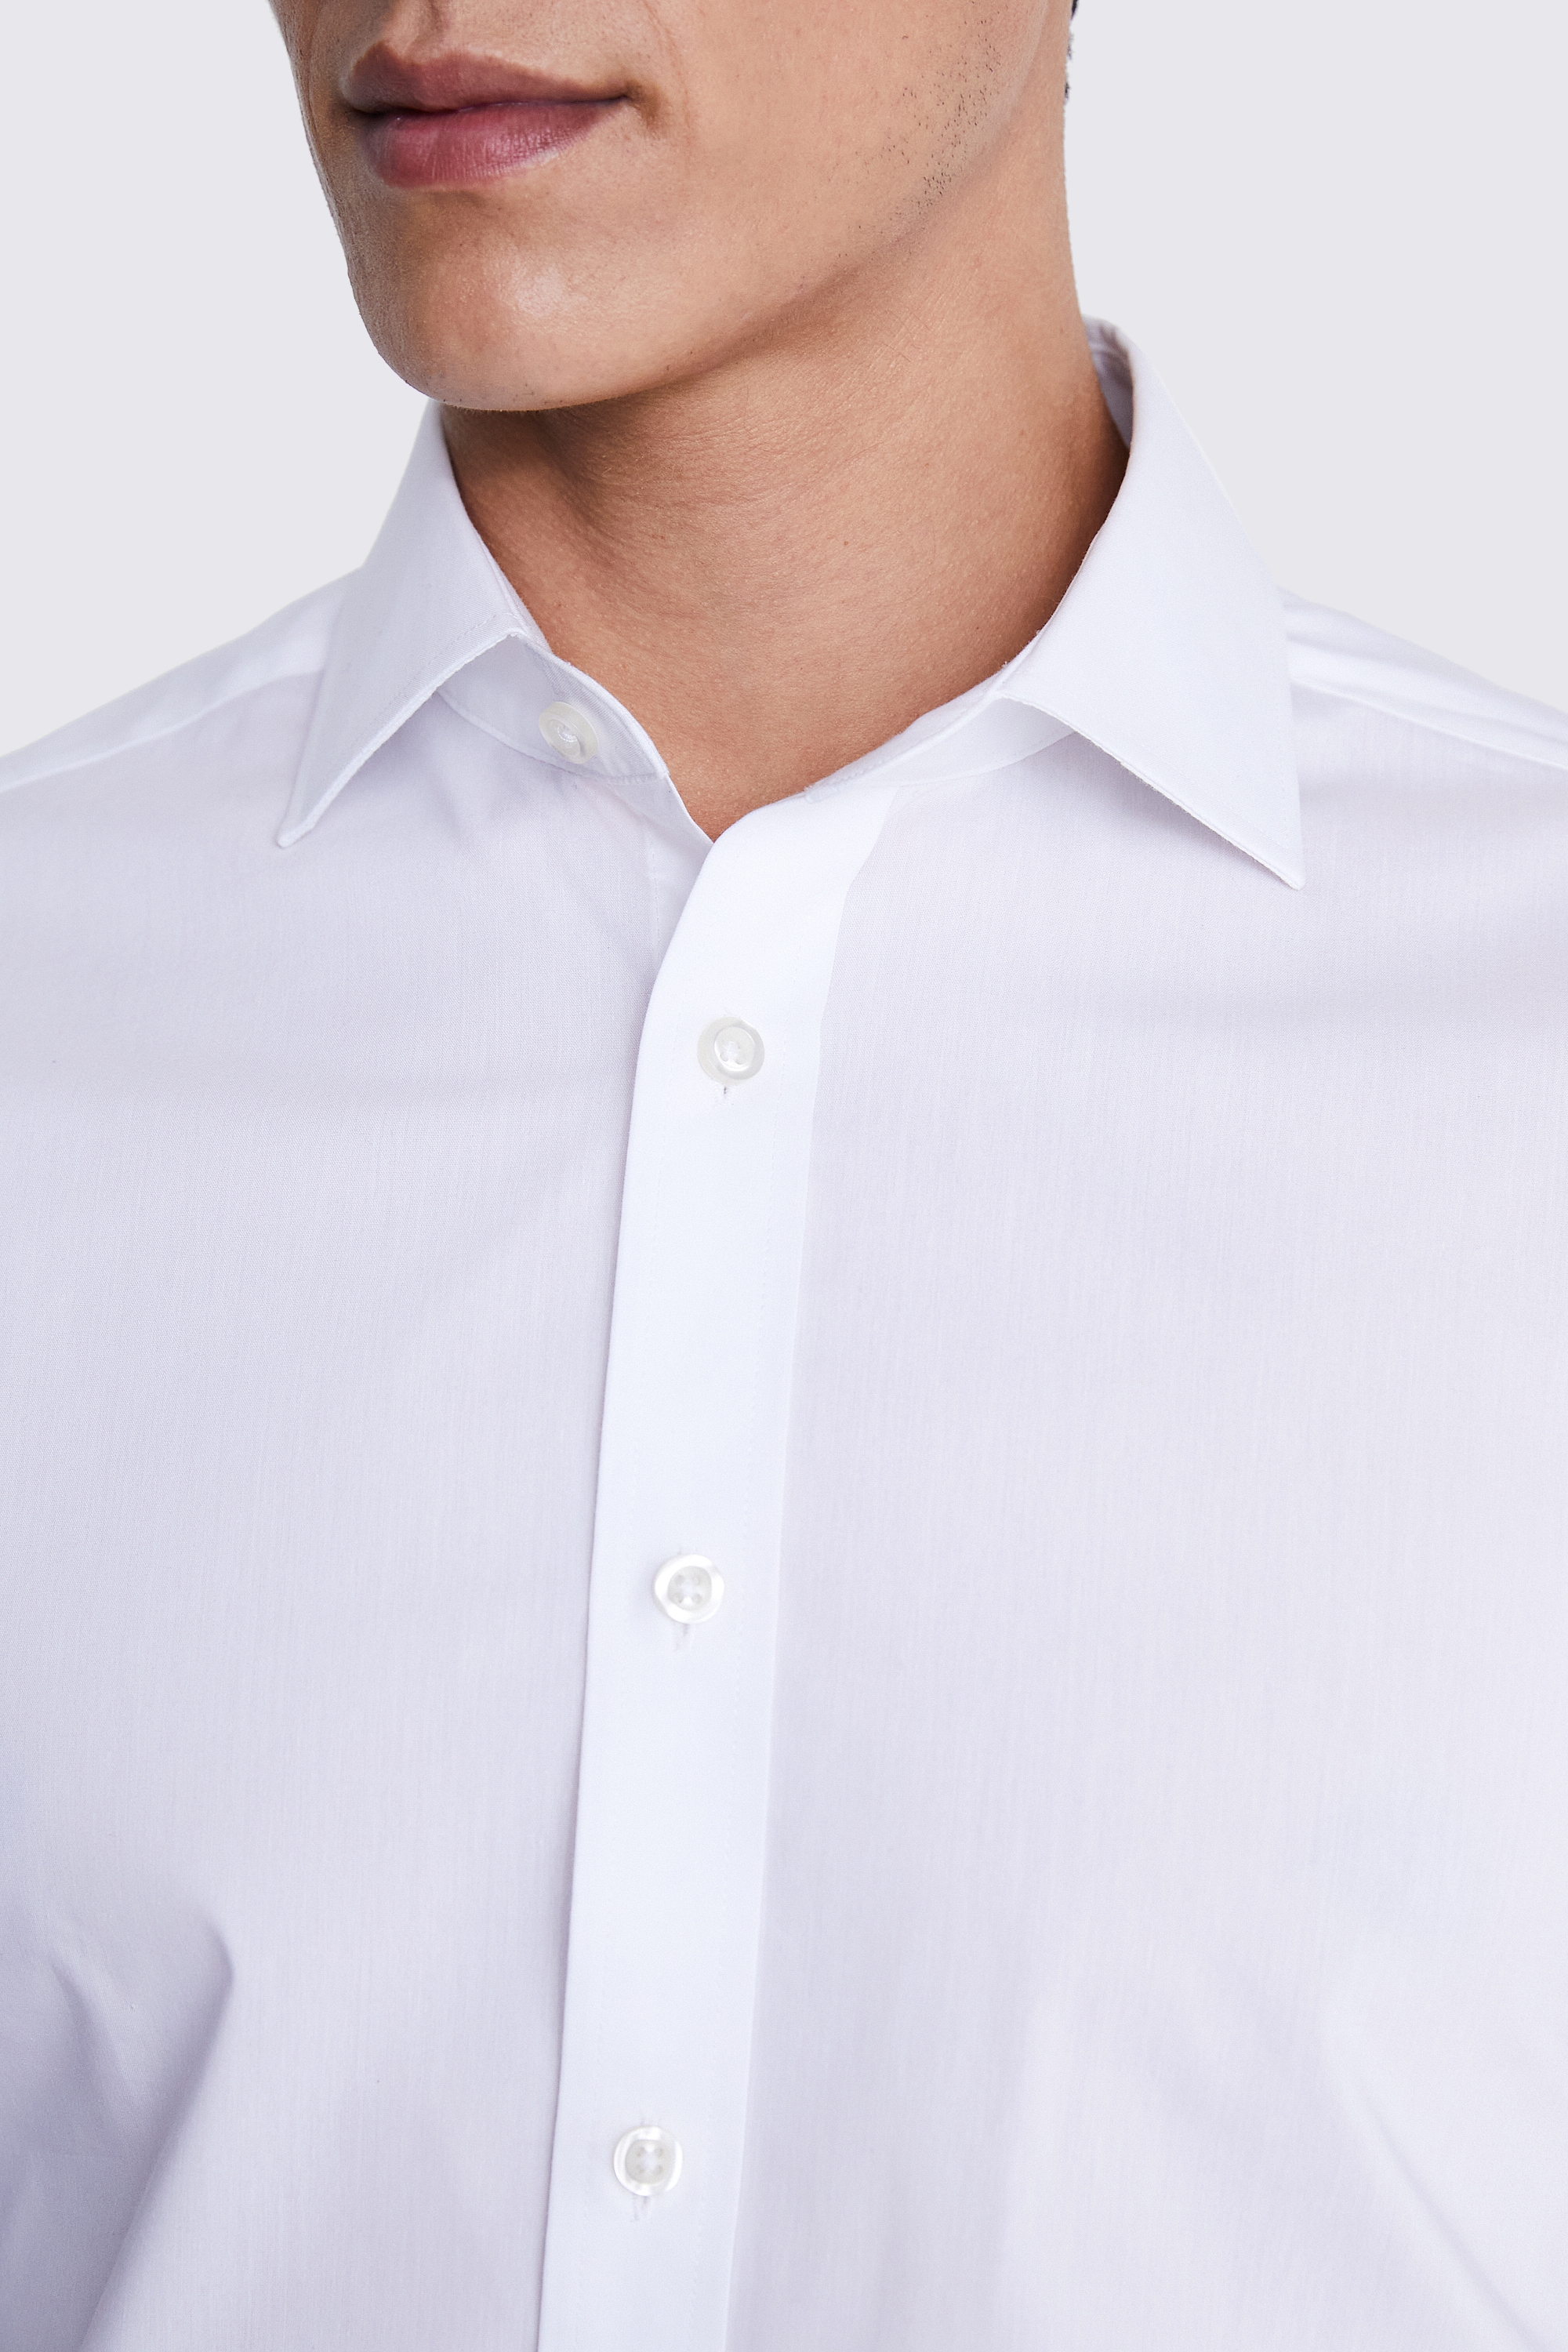 Regular Fit White Stretch Shirt | Buy Online at Moss